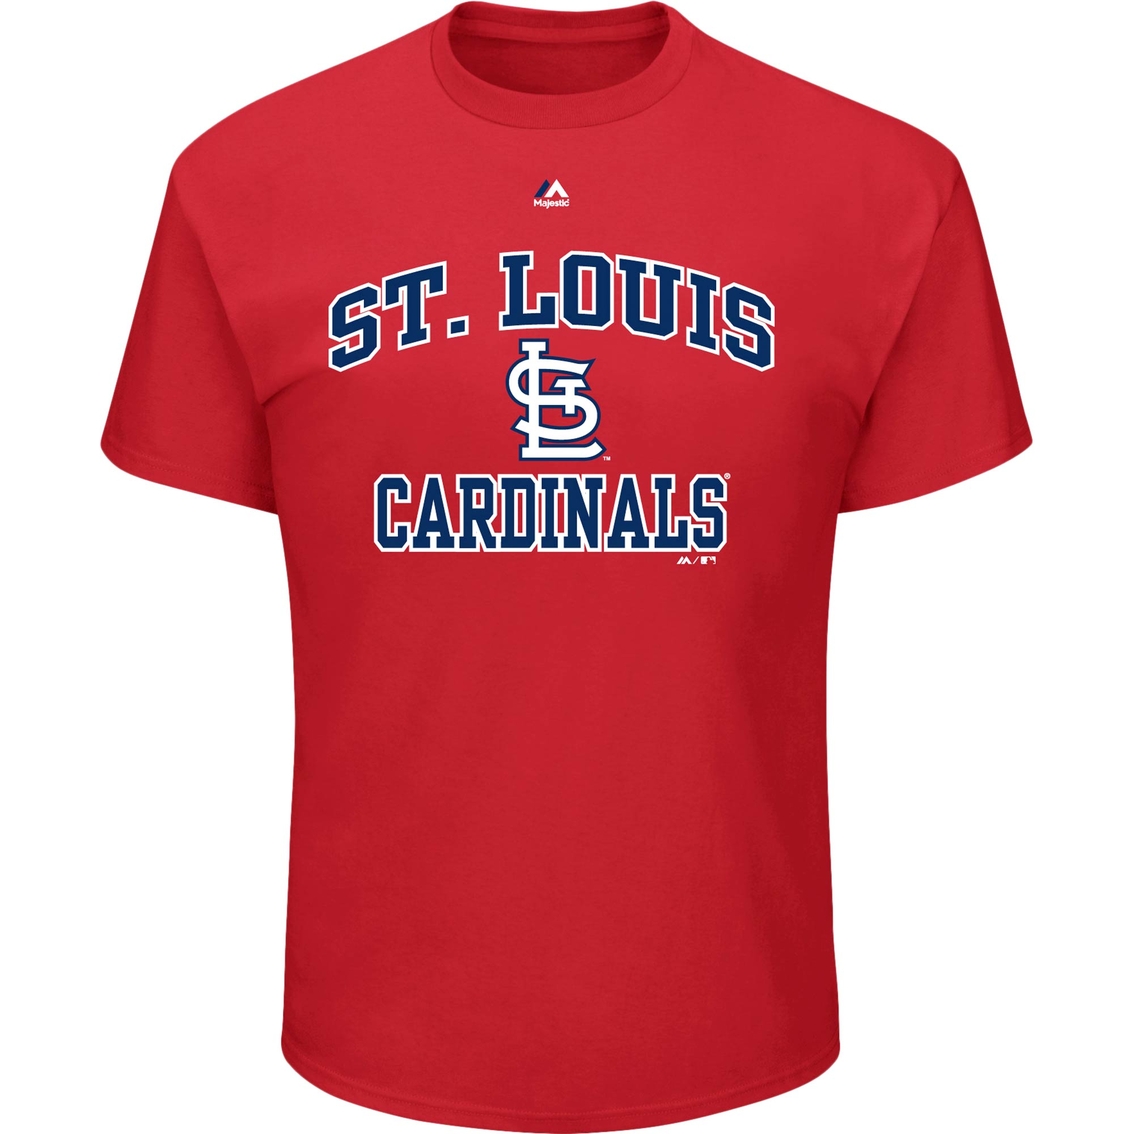 Majestic Athletic MLB St. Louis Cardinals Heart and Soul Tee - Image 2 of 3